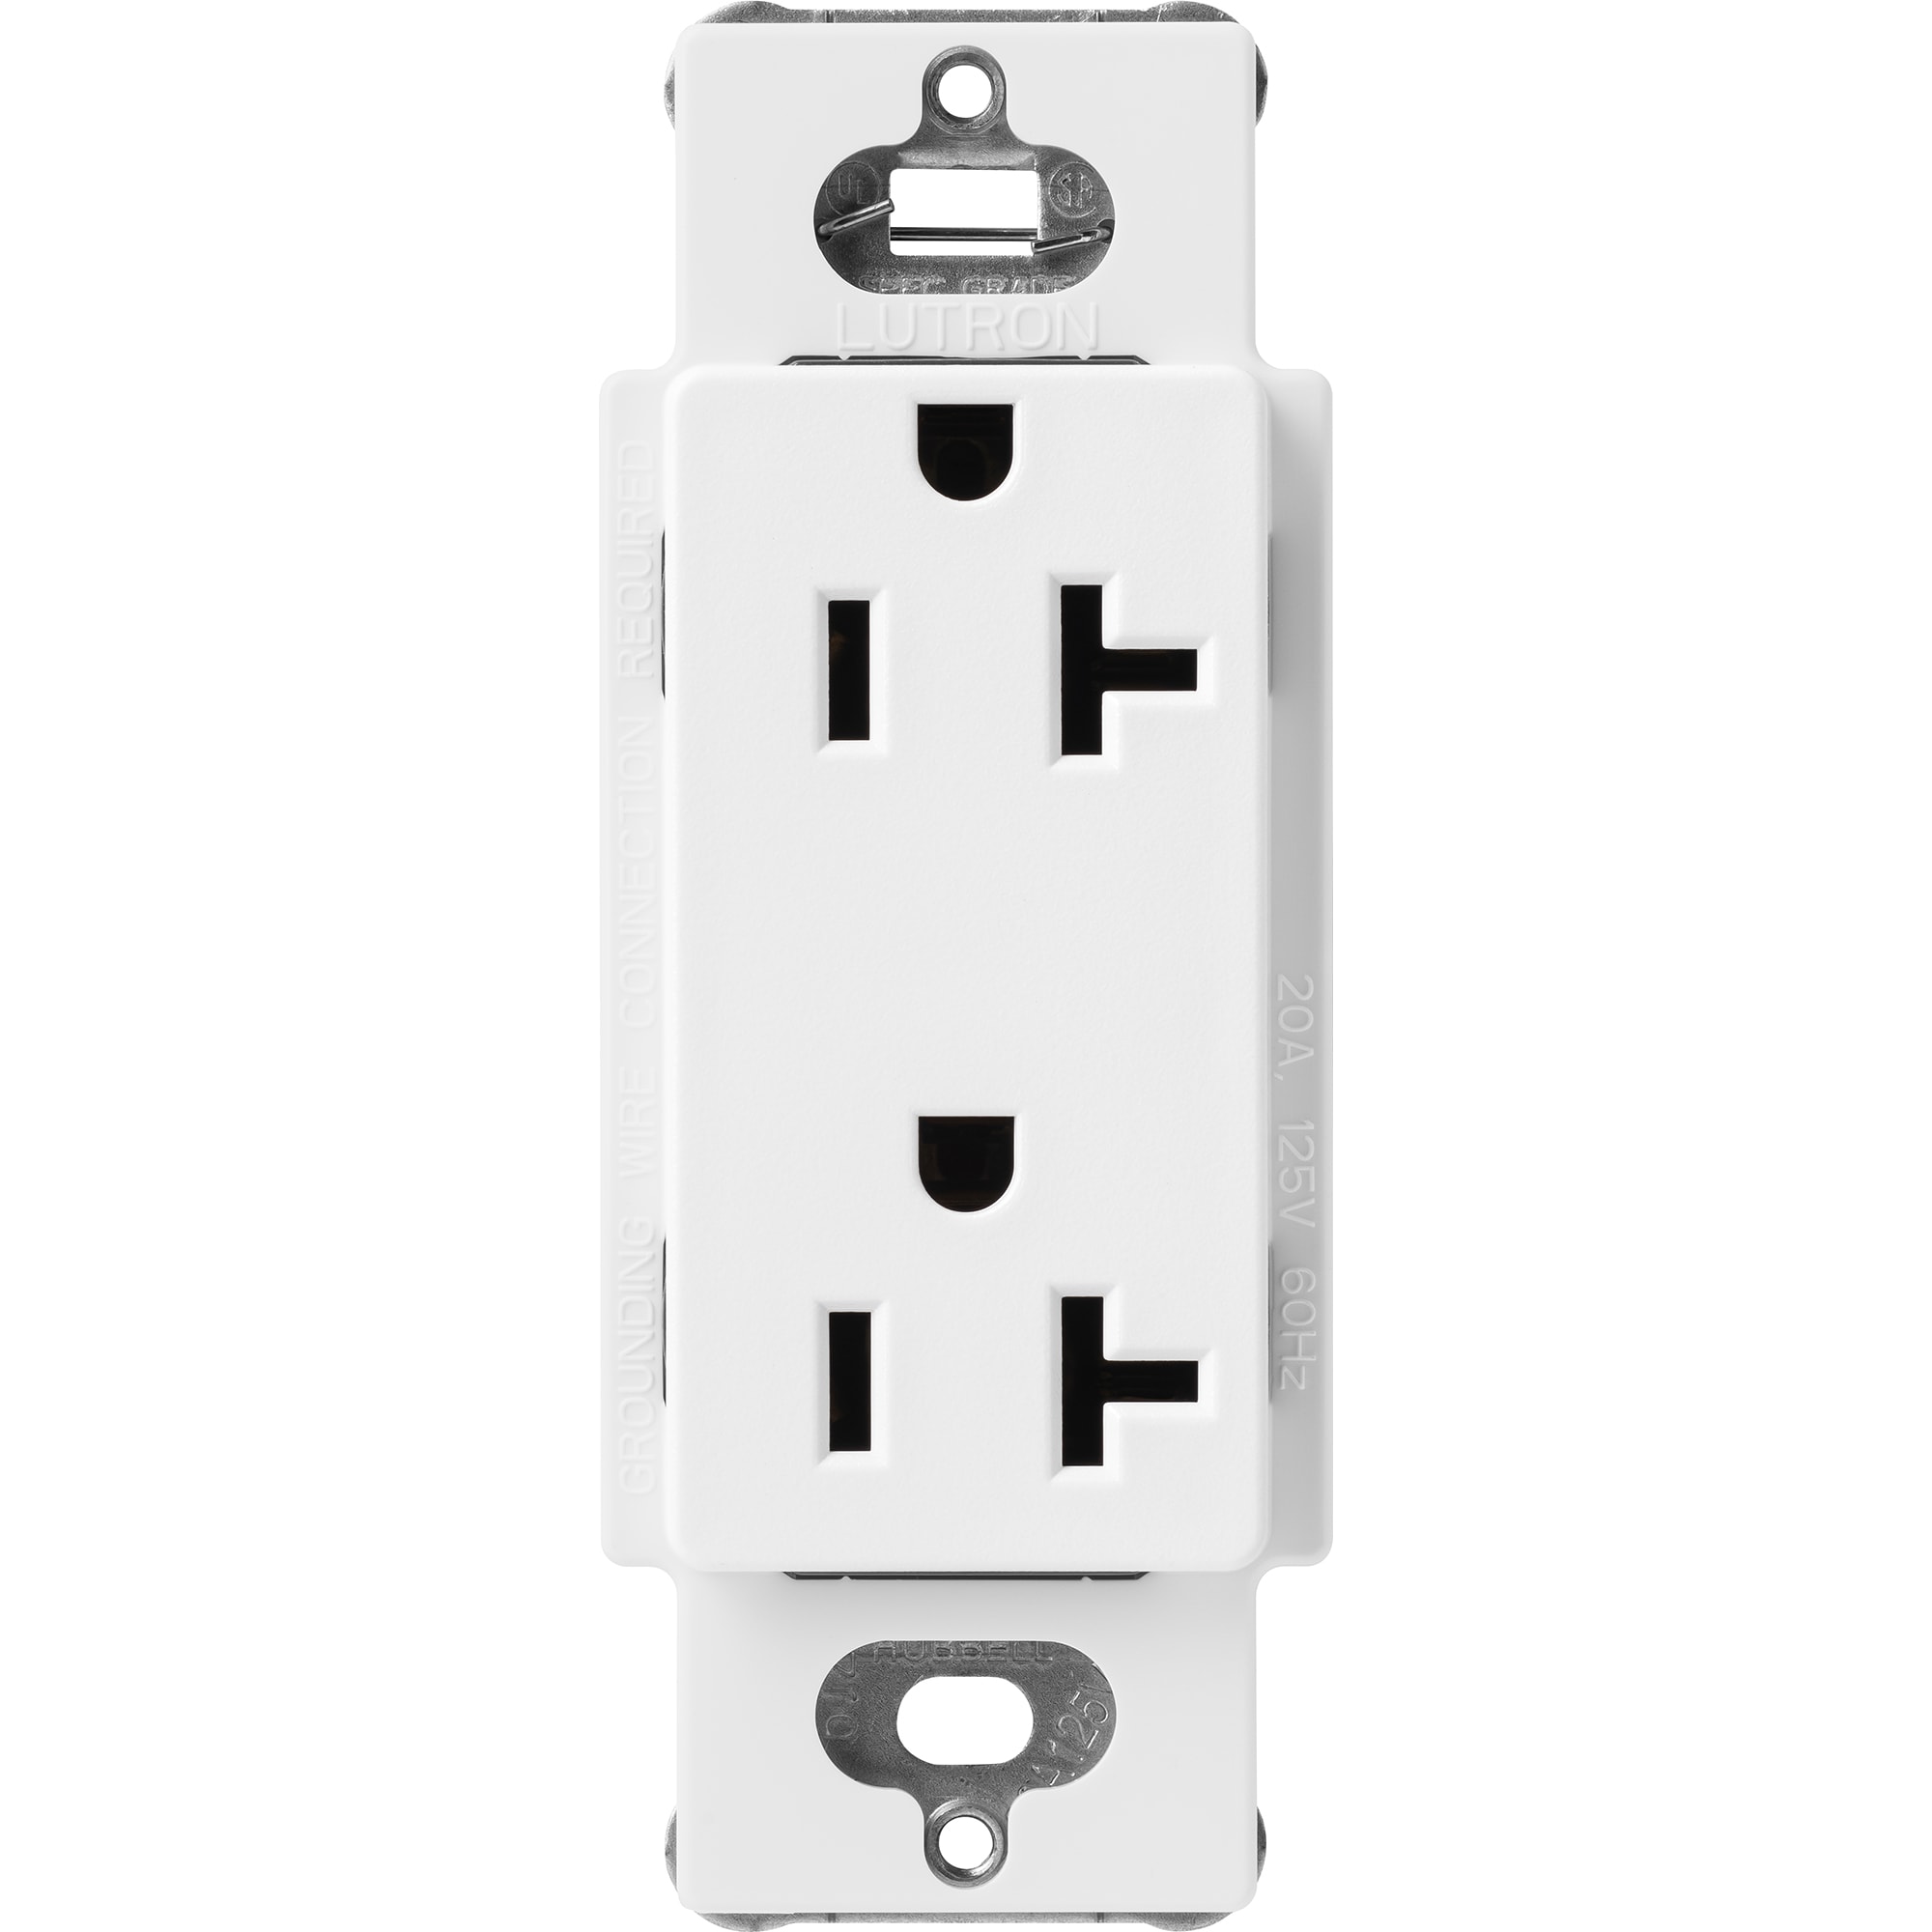 Claro 20-Amp 120-Volt Residential Decorator Outlet, Snow | - Lutron SCR-20-SW